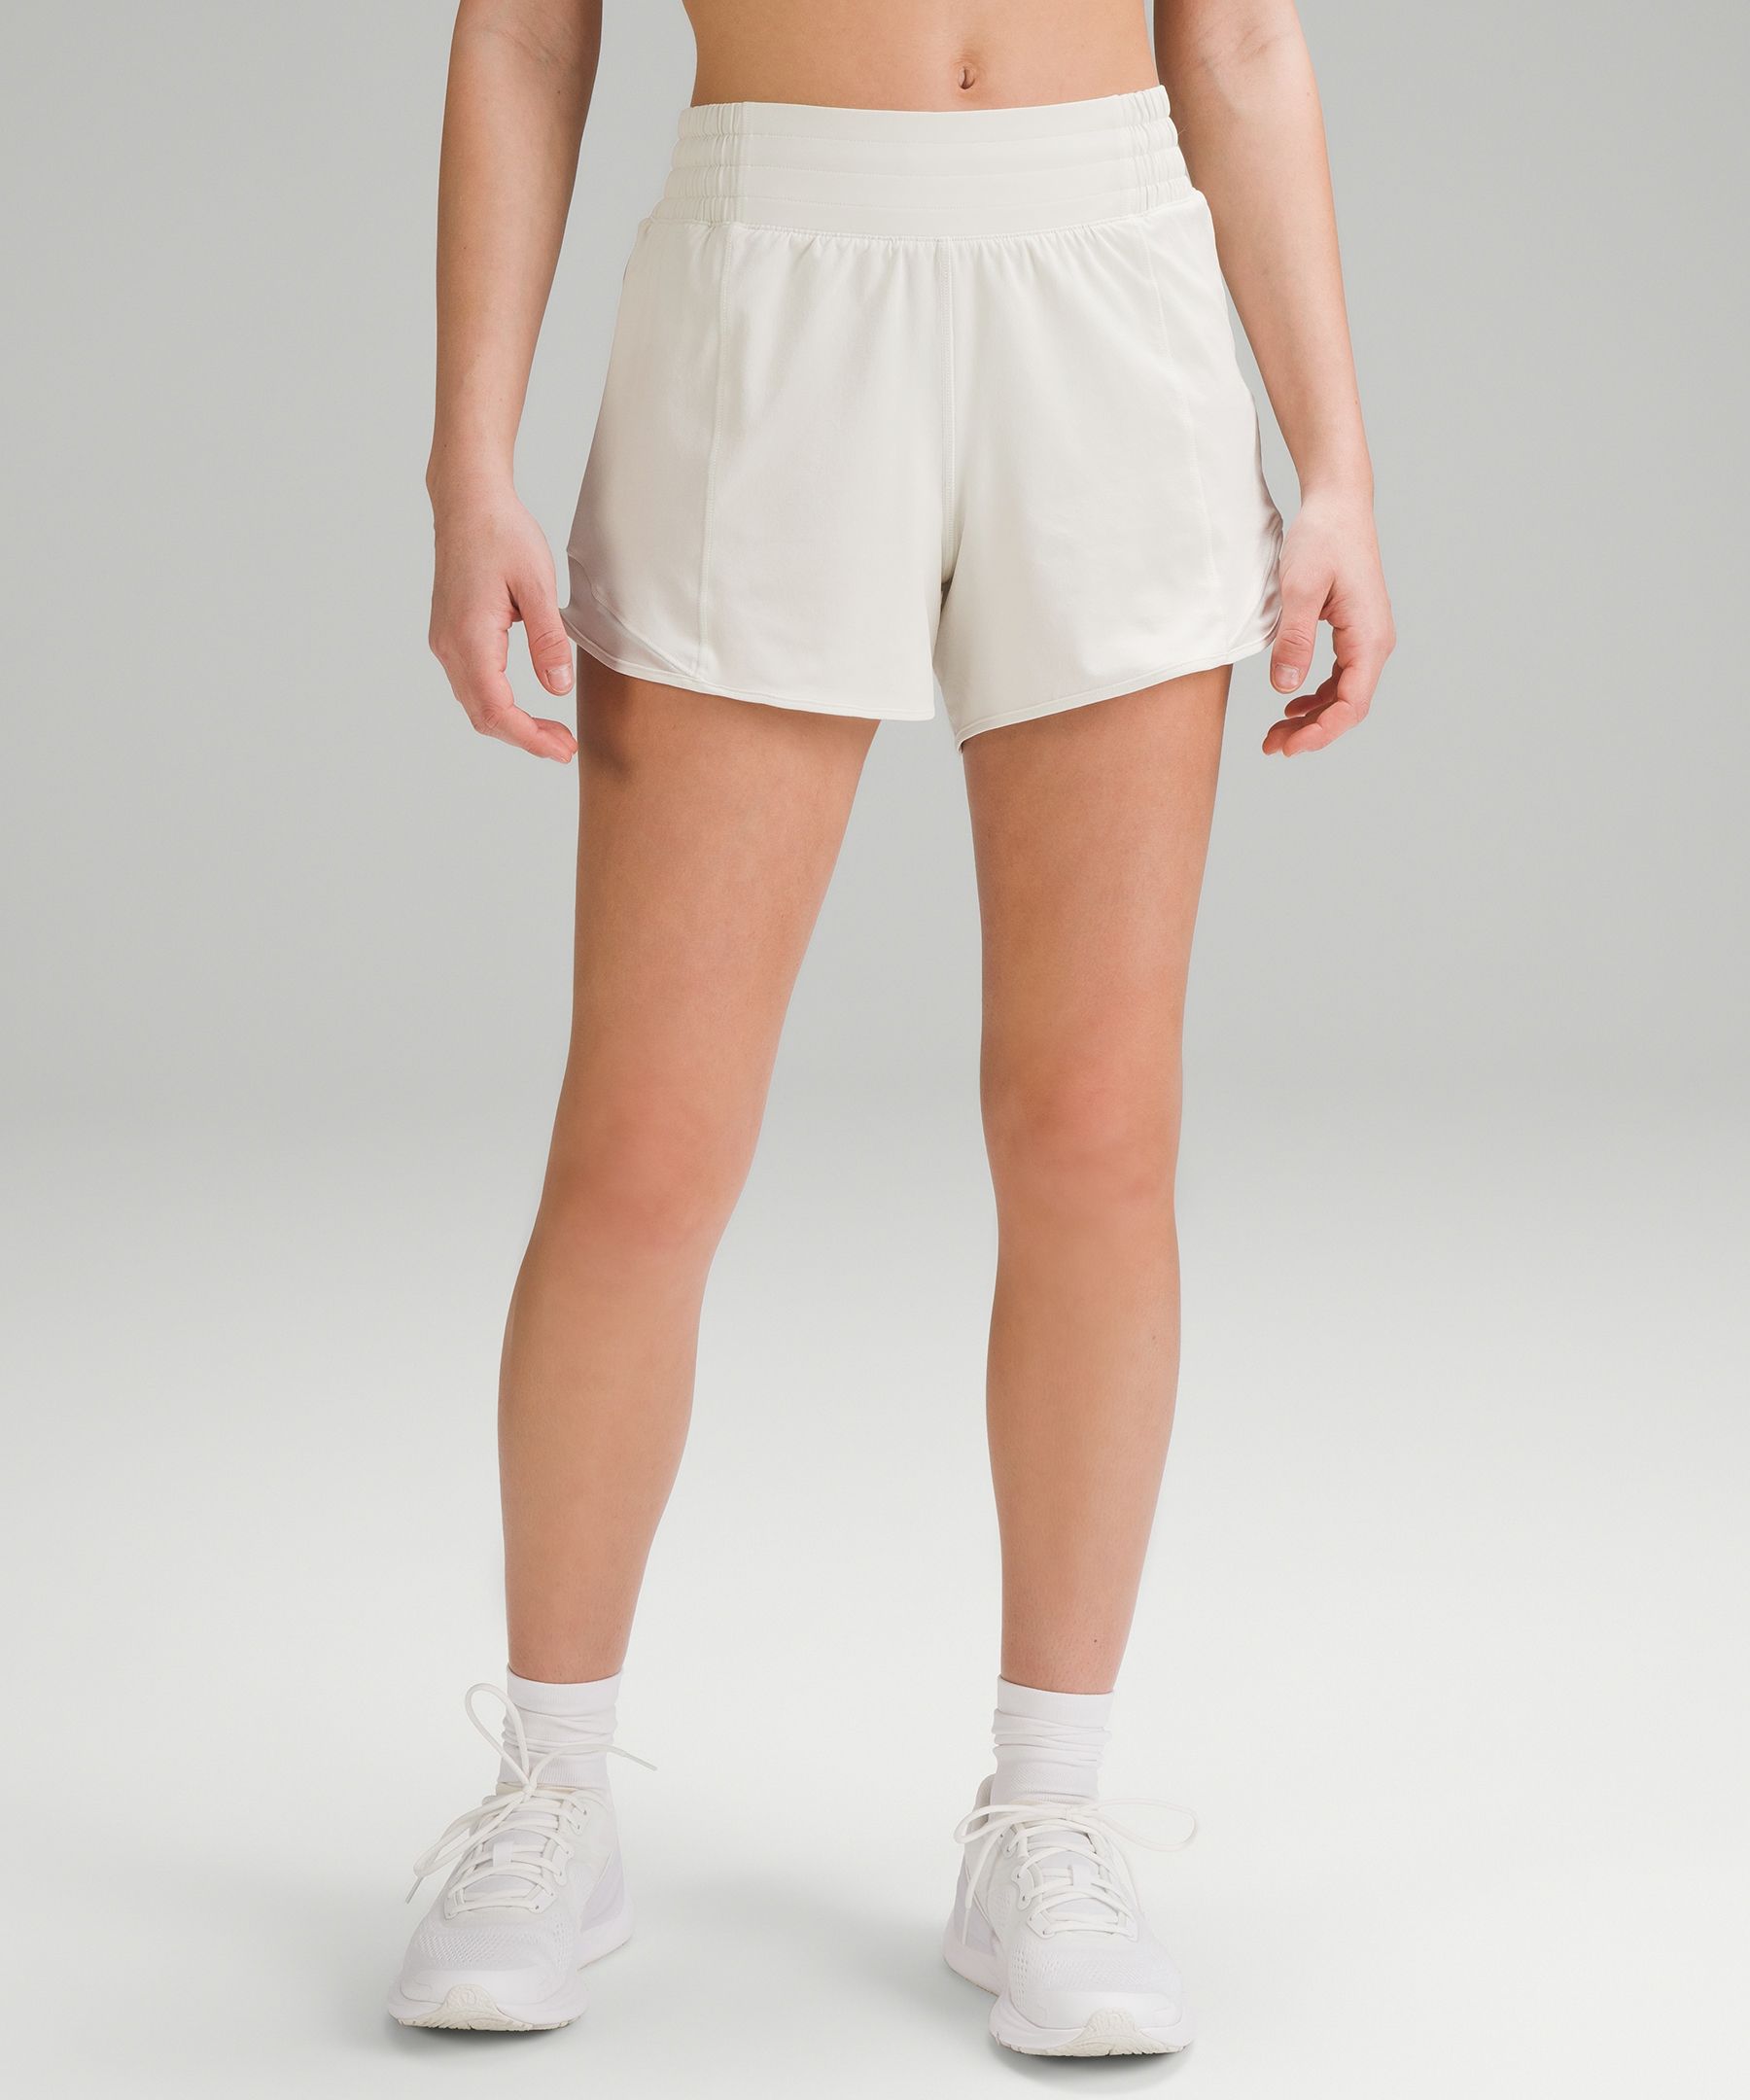 Hotty Hot High-Rise Lined Short 4, Shorts